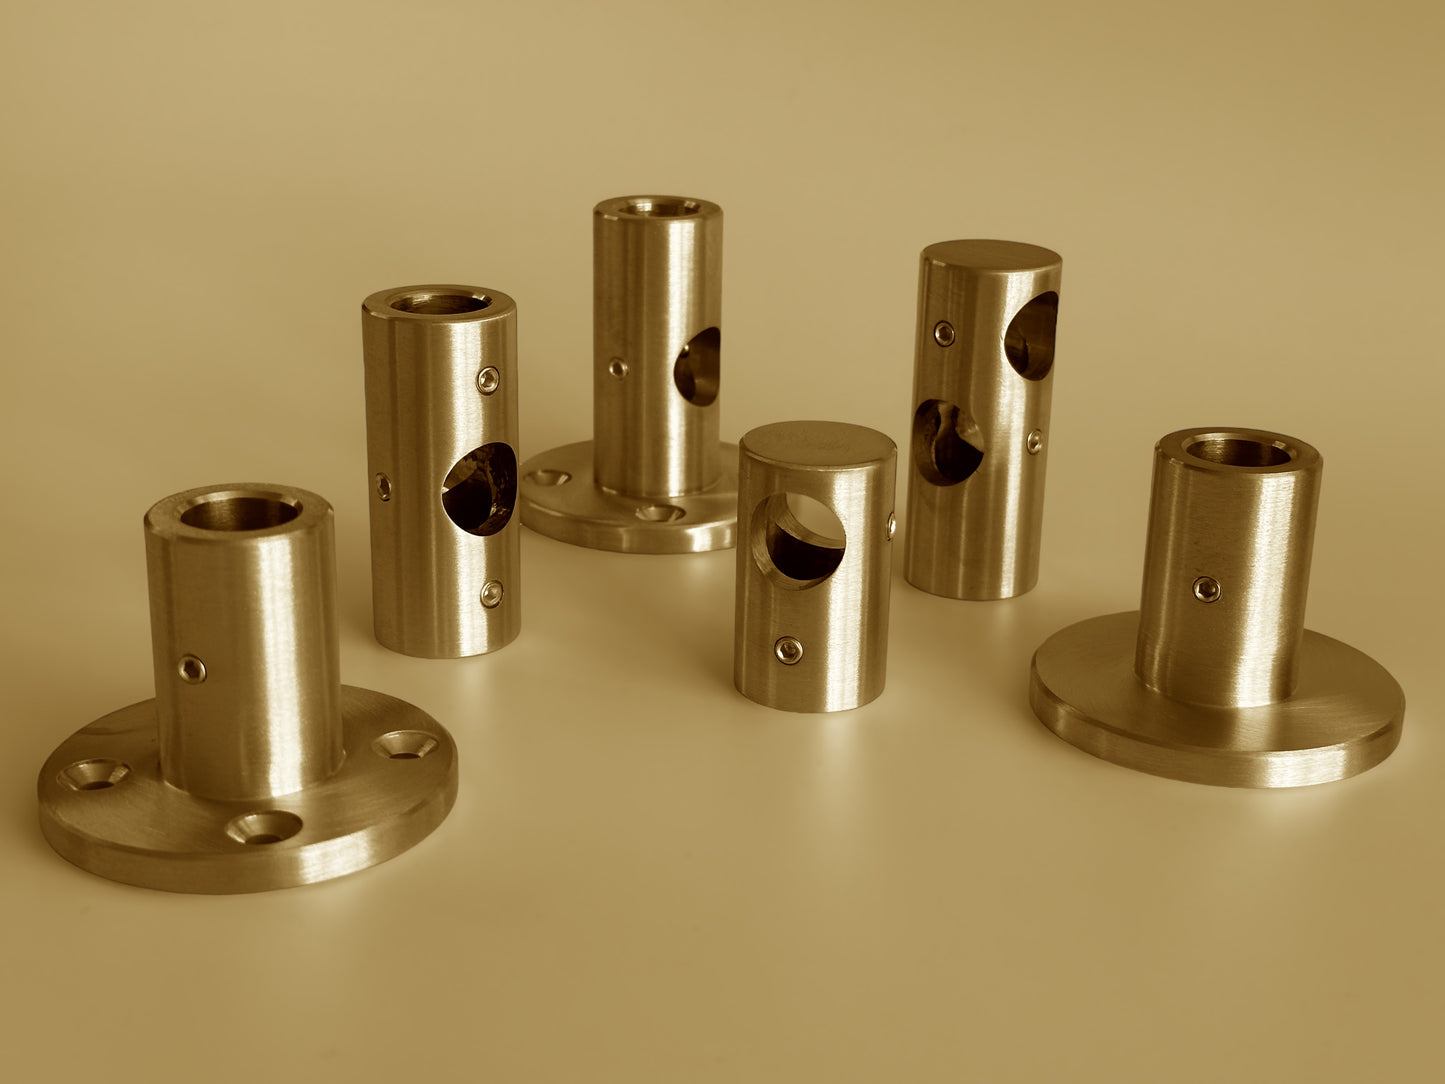 Unlacquered, solid brass shelf fittings and brackets for 5/8" or 15/32" diameter rods and pipes. 